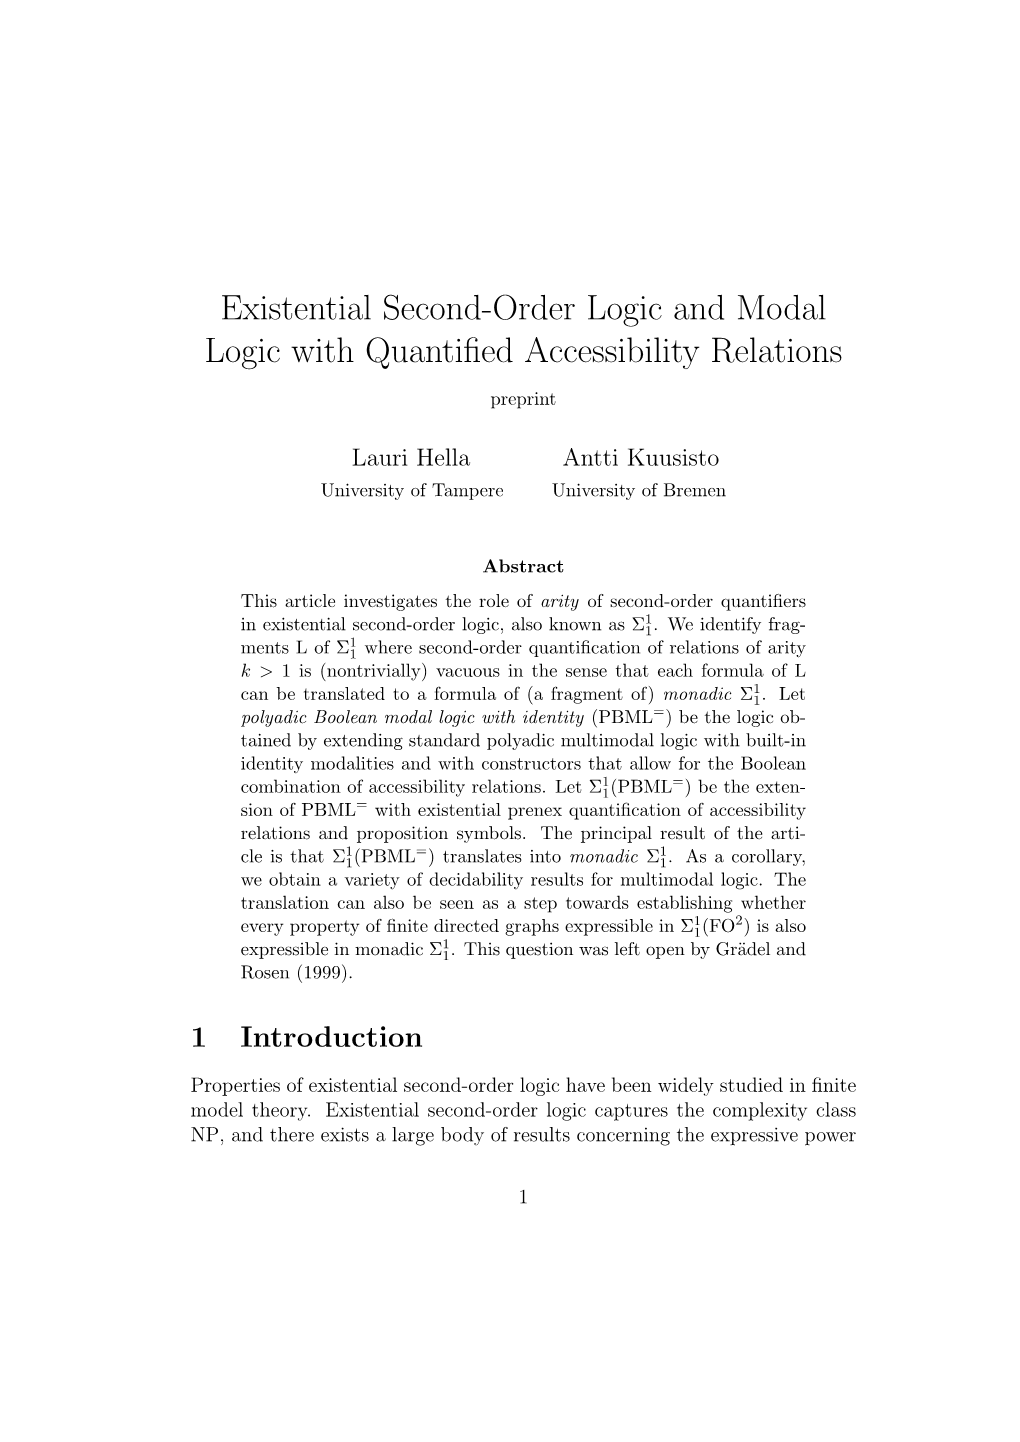 Existential Second-Order Logic and Modal Logic with Quantified